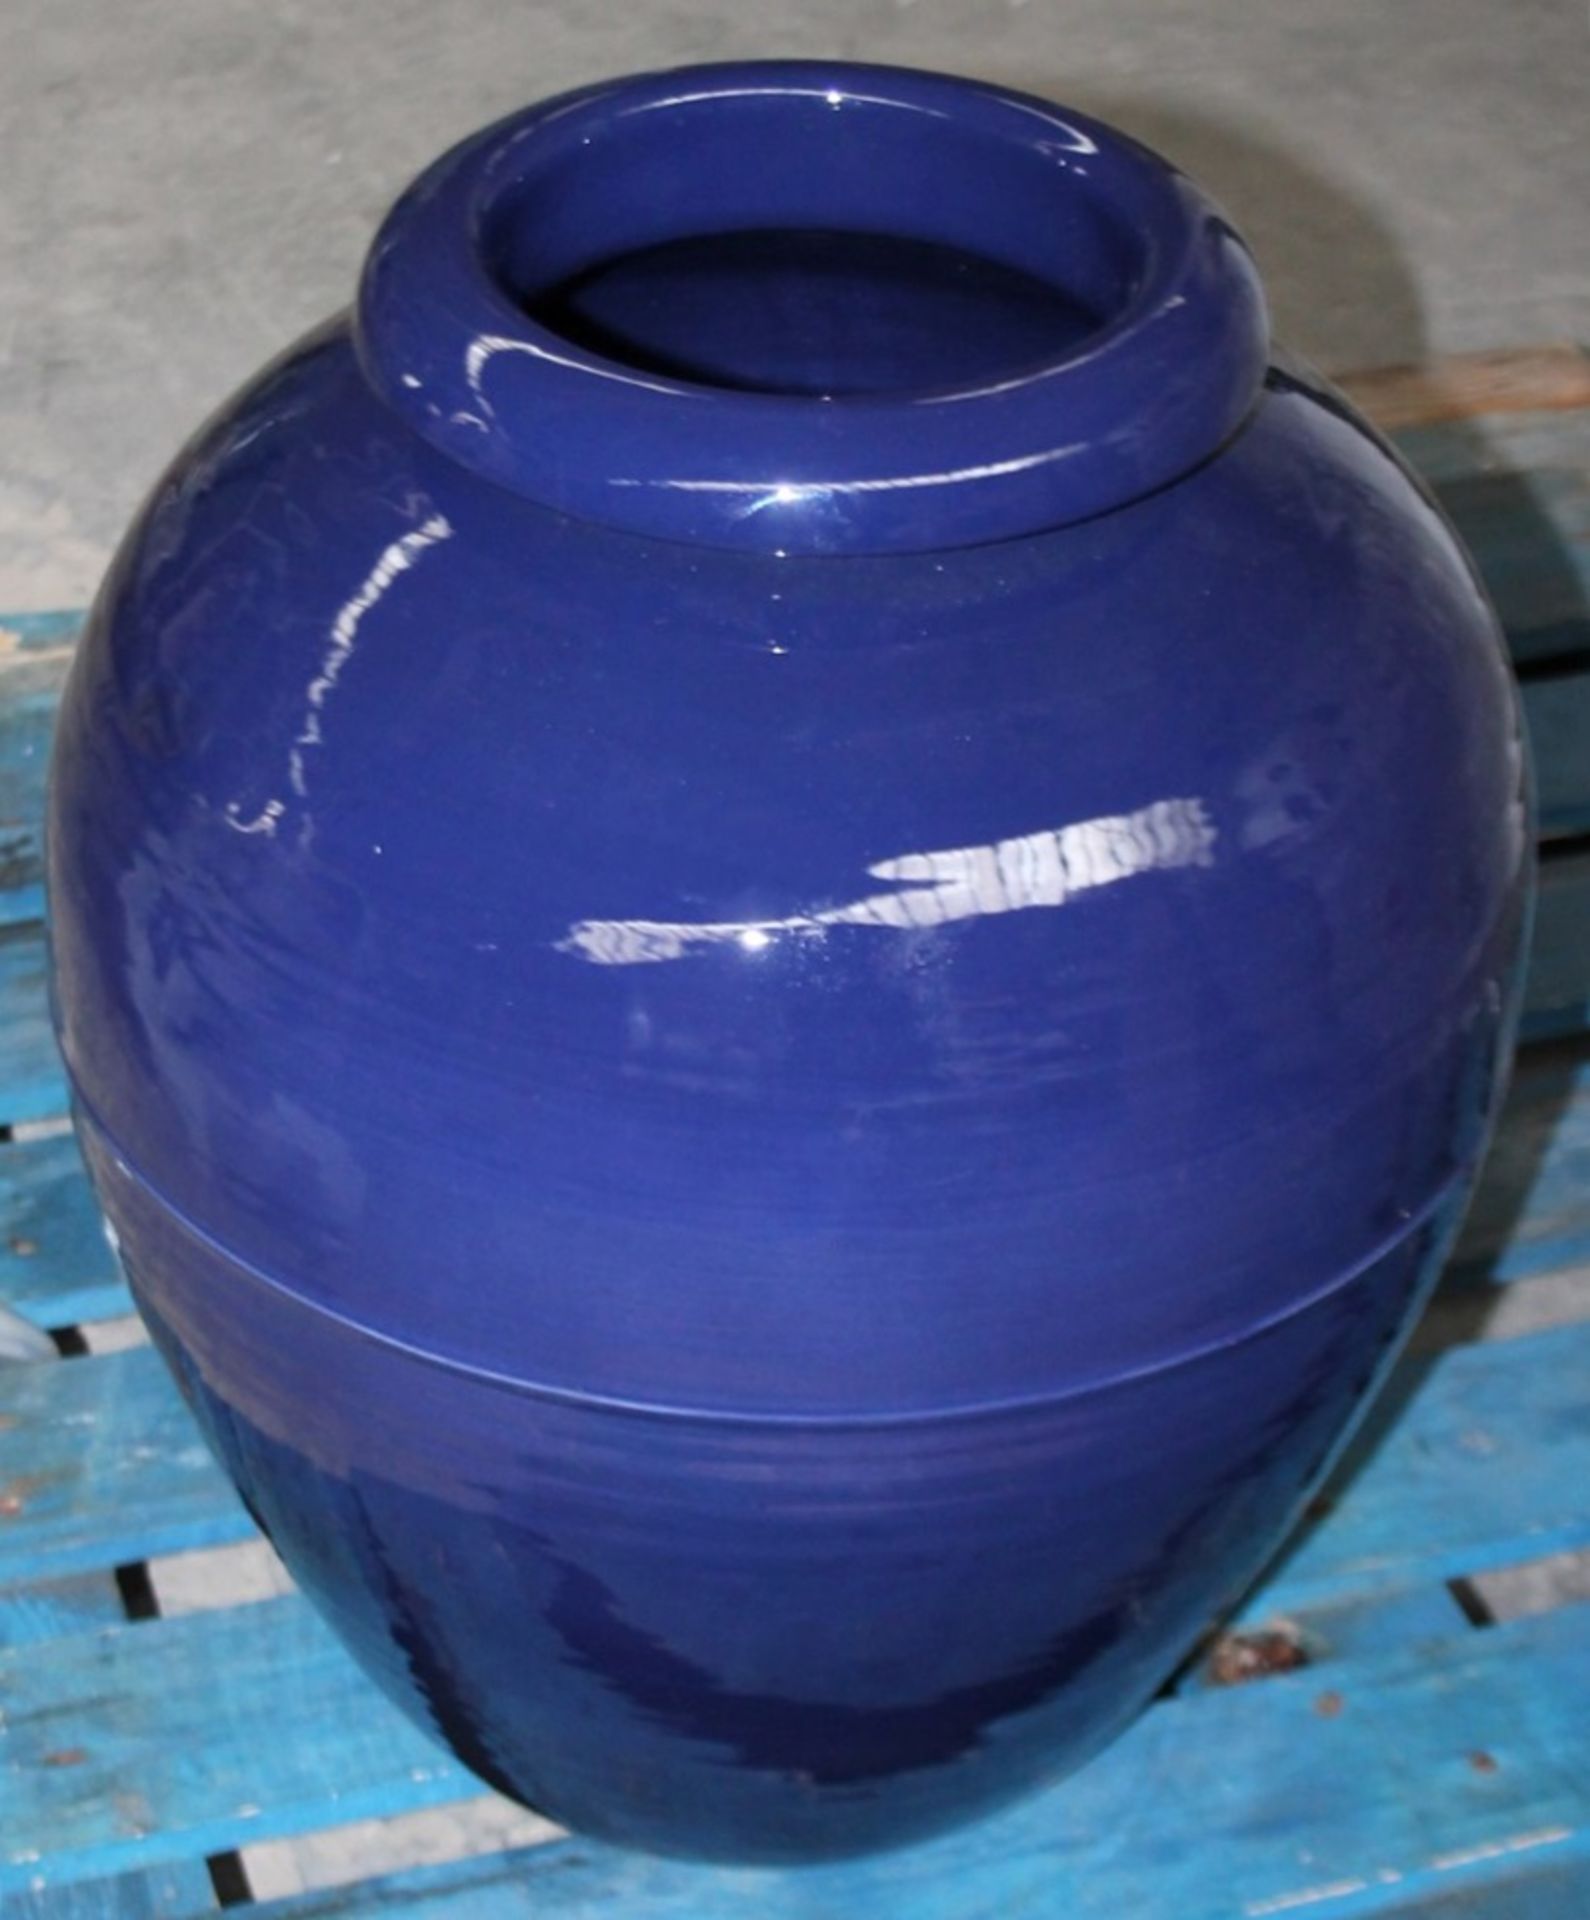 1 x BAUER POTTERY LOS ANGELES Large 22 Inch Oil Jar In Blue (Circa 2000) - Original Price £700.00 - Image 4 of 4